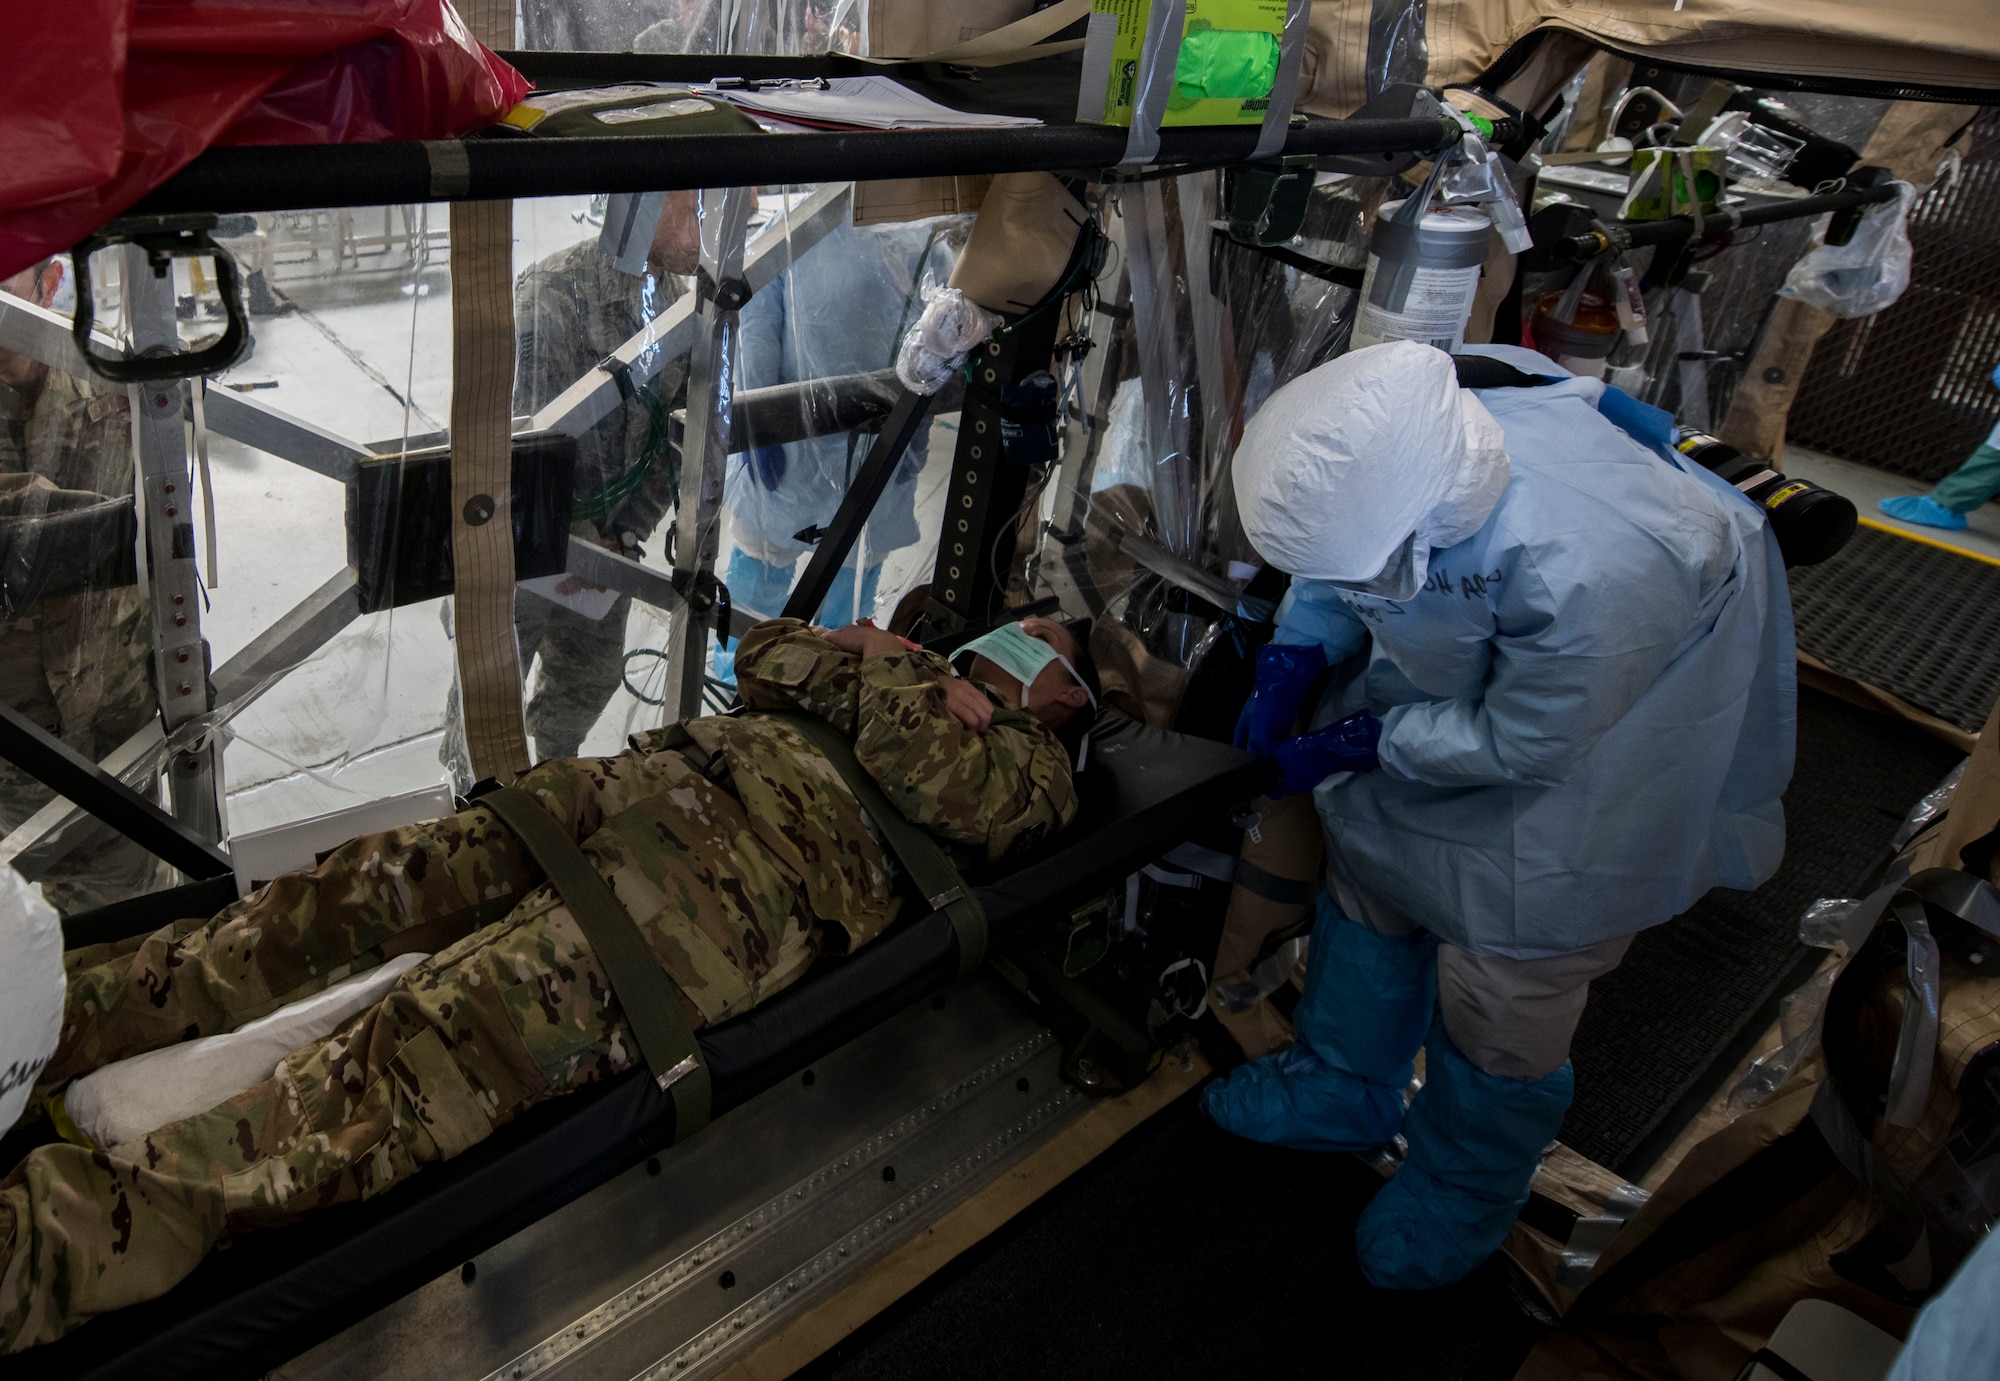 Staff Sgt. Lee Nembhard, an aeromedical evacuation technician assigned to the 375th Aeromedical Evacuation Squadron from Scott Air Force Base, Ill., fastens a litter to a Transport Isolation System during a TIS training exercise at Joint Base Charleston, S.C., October 23, 2019. The TIS is a device used to transport Ebola patients, either by C-17 Globemaster III or C-130 Hercules, while preventing the spread of disease to medical personnel and aircrews until the patient can get to one of three designated hospitals in the United States that can treat Ebola patients. JB Charleston is currently the only military installation with a TIS. The TIS mission is a sub-specialty of the aeromedical evacuation mission which requires frequent training to maintain readiness.